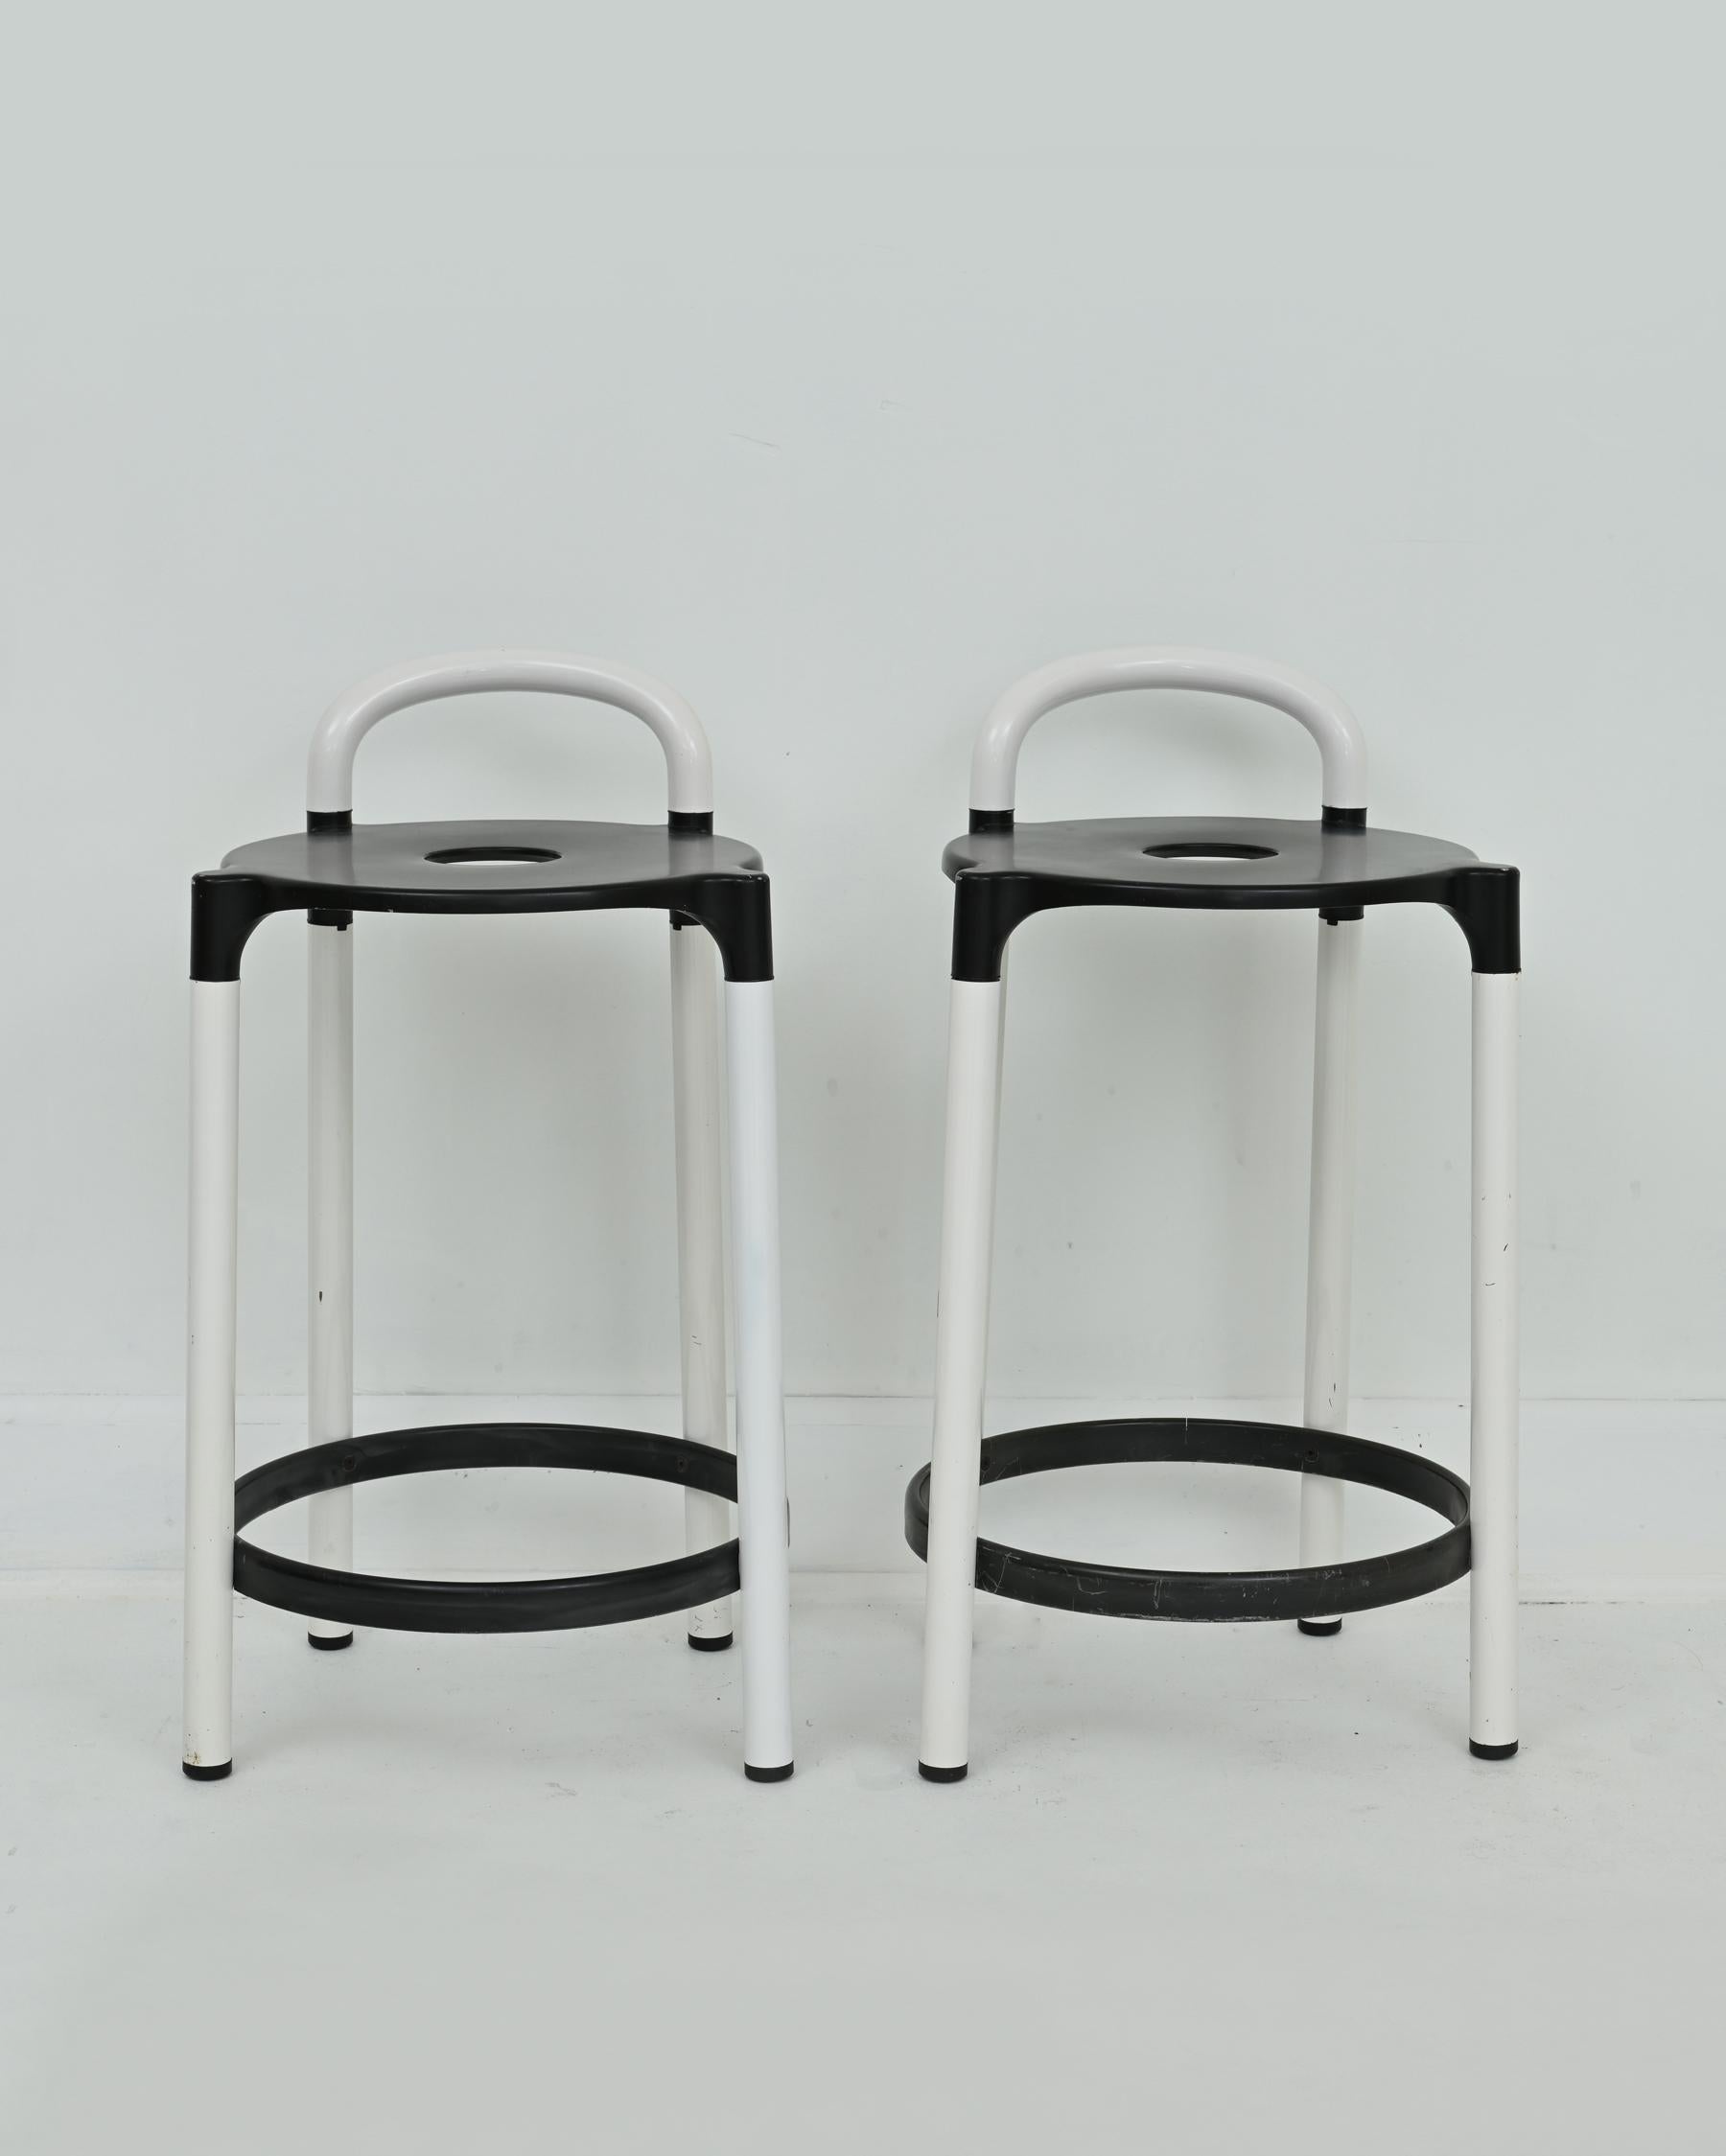 27” high x 18” deep x 16” wide. Seat height: 21.5”

1980s pair of postmodern stools by Anna Casatelli Ferrieri for Kartell. Made in Italy. Black and white colorway. In good vintage condition with some signs of wear and varying shades of white paint